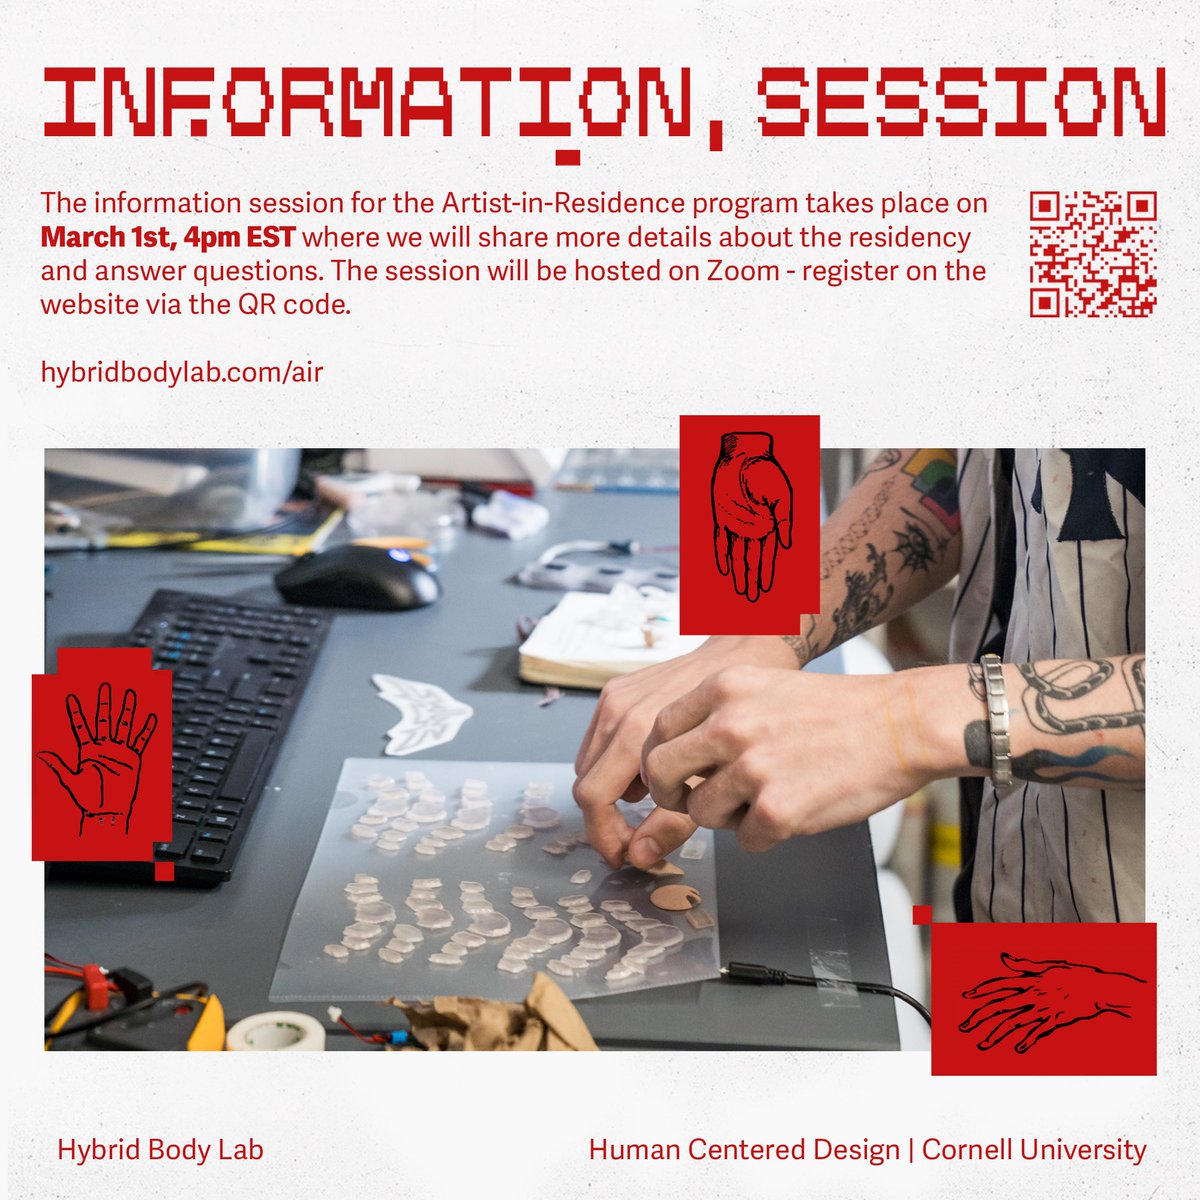 We invite you to join us for an information session on March 1st at 4 pm. Morgan Chen (AiR ‘22) and Joe George (AiR ‘23), will share insights from their residency experiences. The information session will be on Zoom. Register here: hybridbody.human.cornell.edu/air